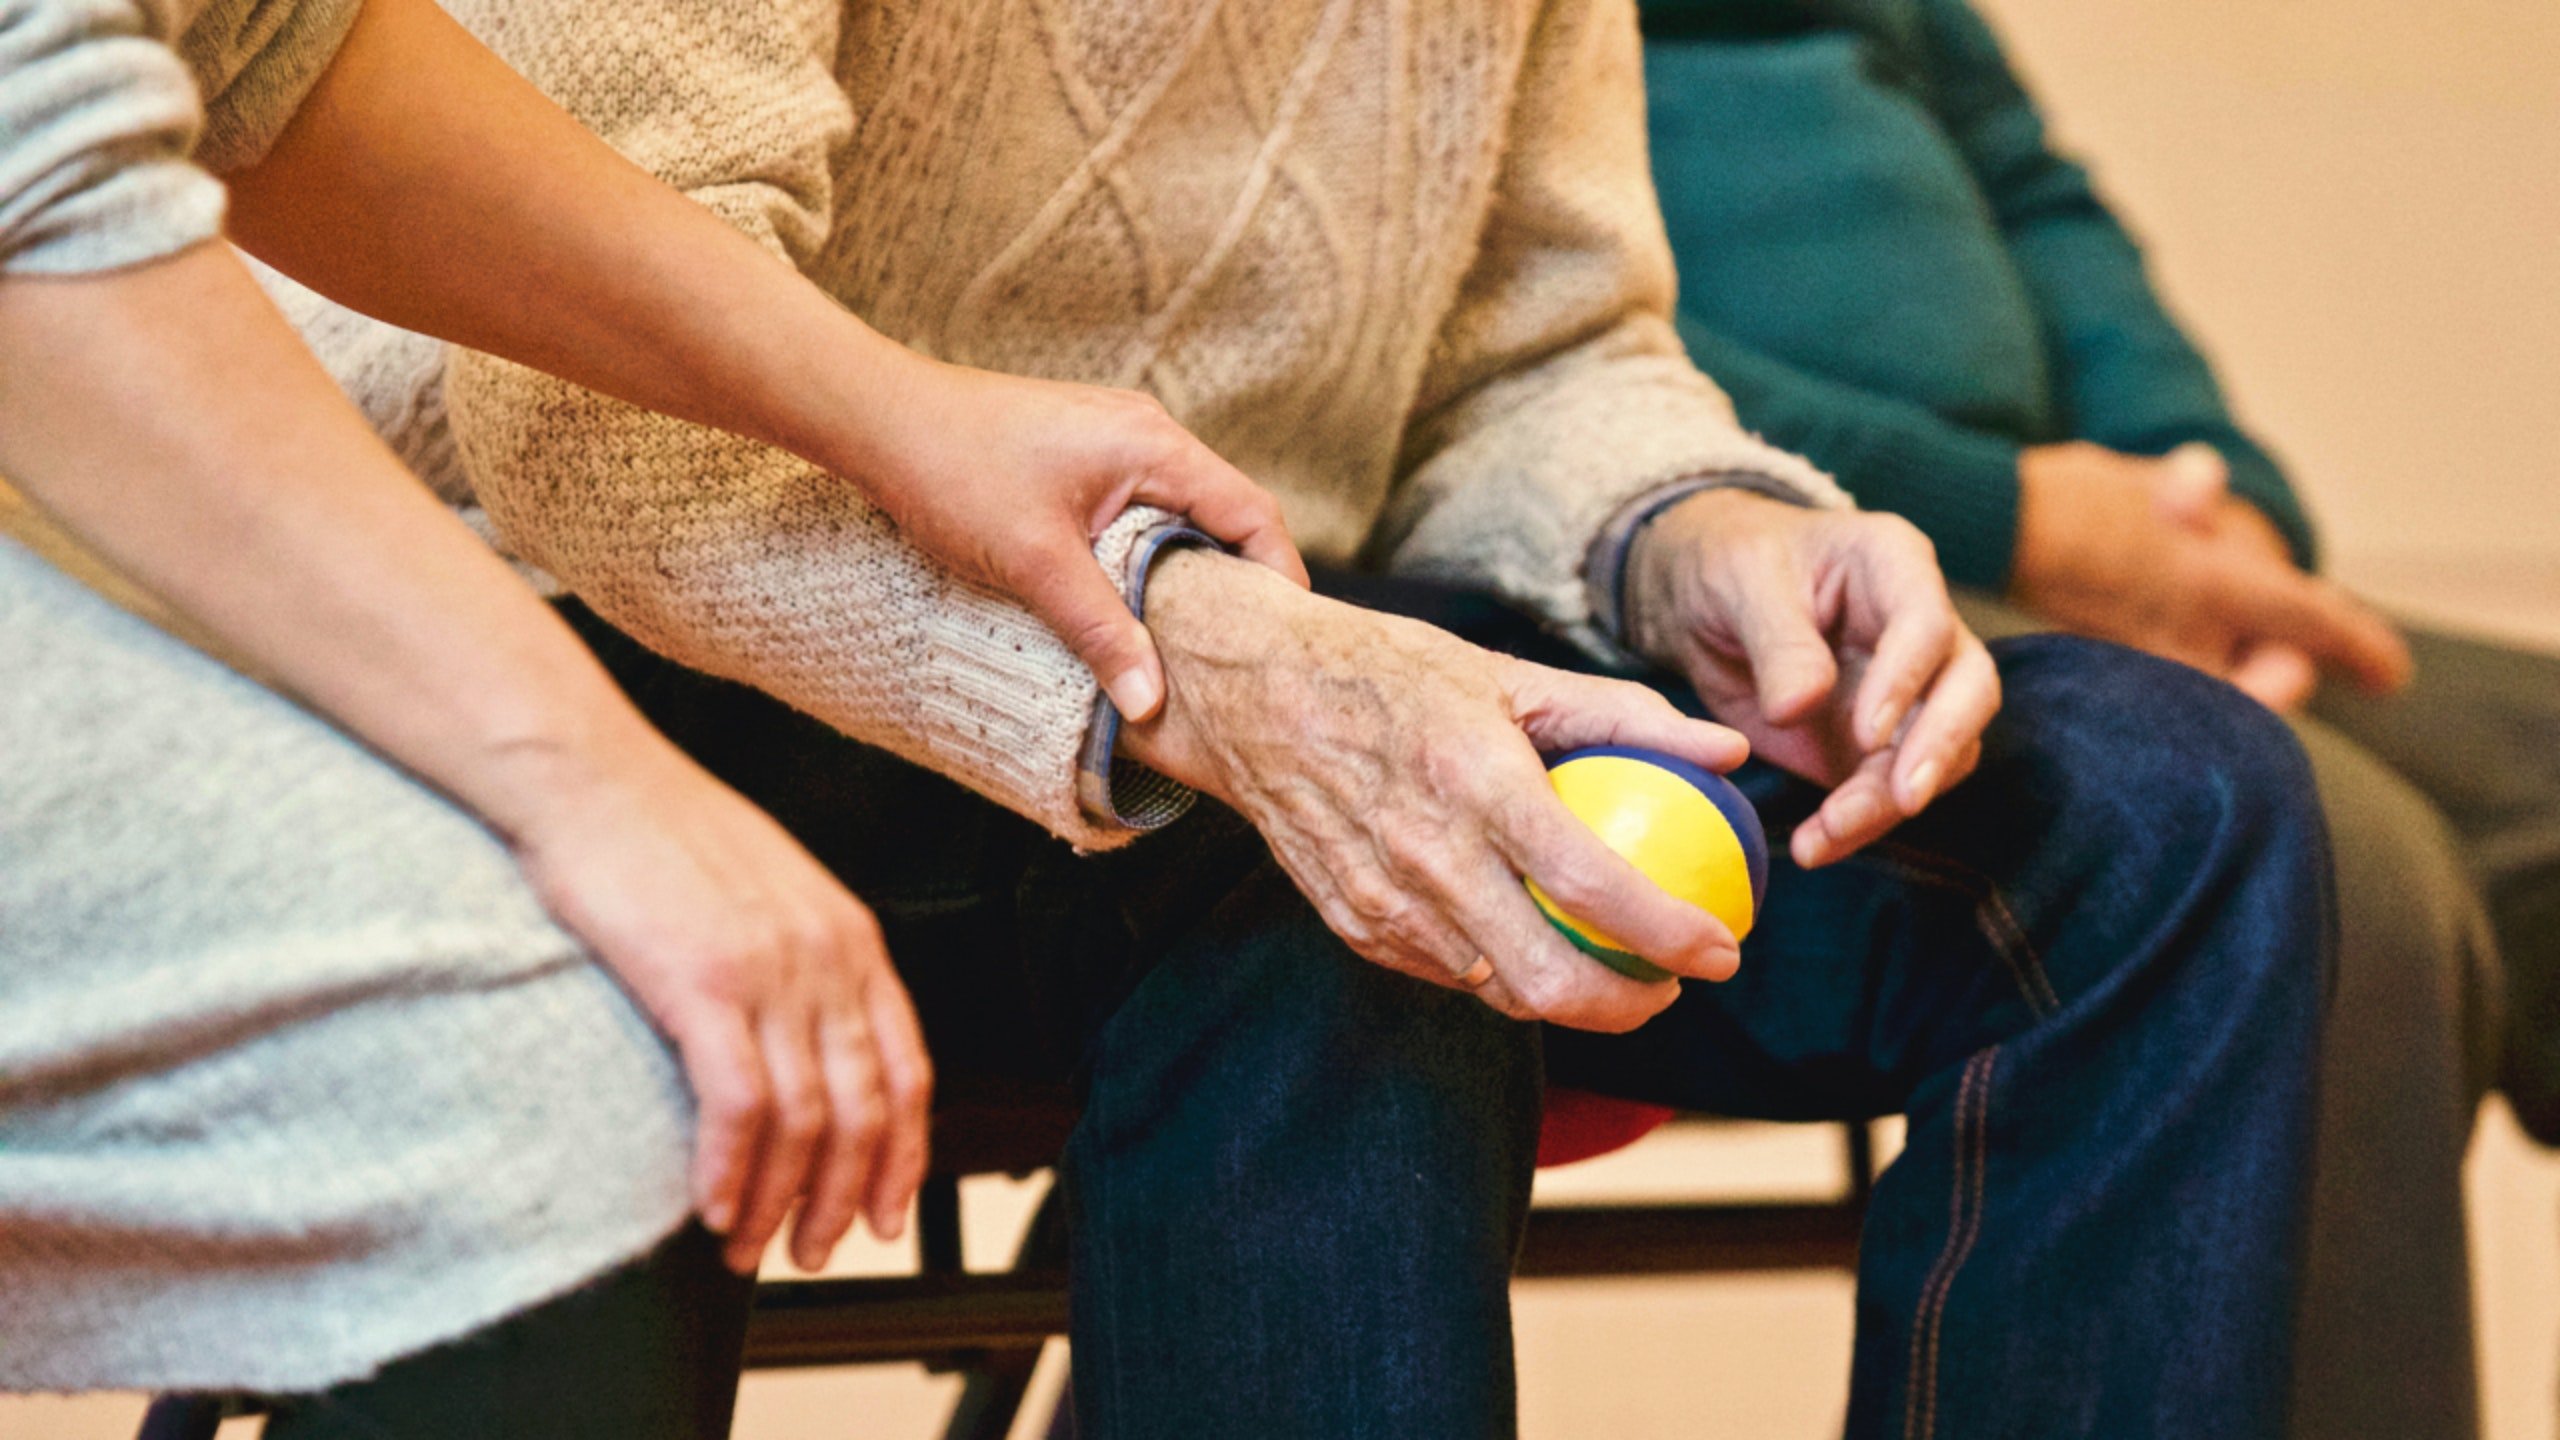 A woman wearing a gray outfit holding the arm of an elderly man who holds a stress ball in his hand | Source: Pexels 